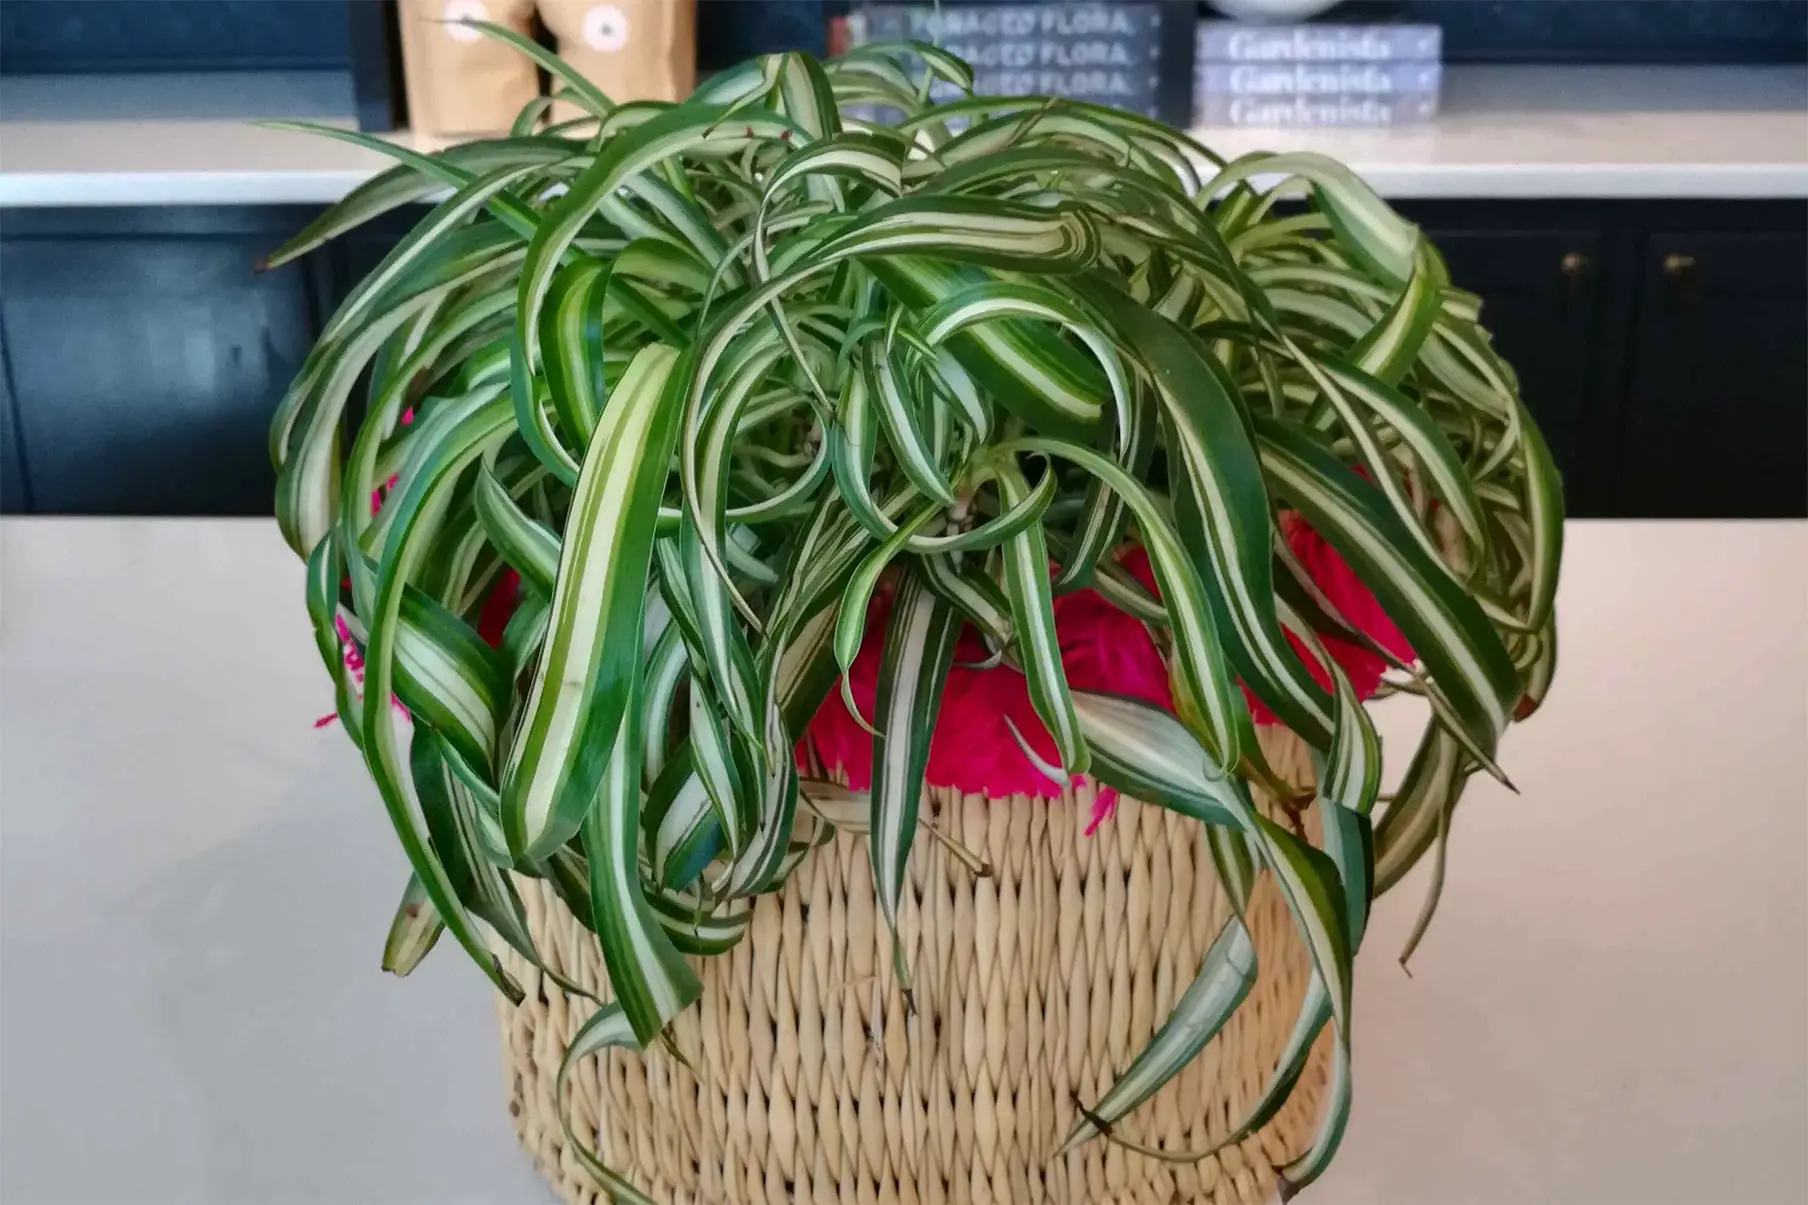 Spider Plant with its green curly variegated long leaves